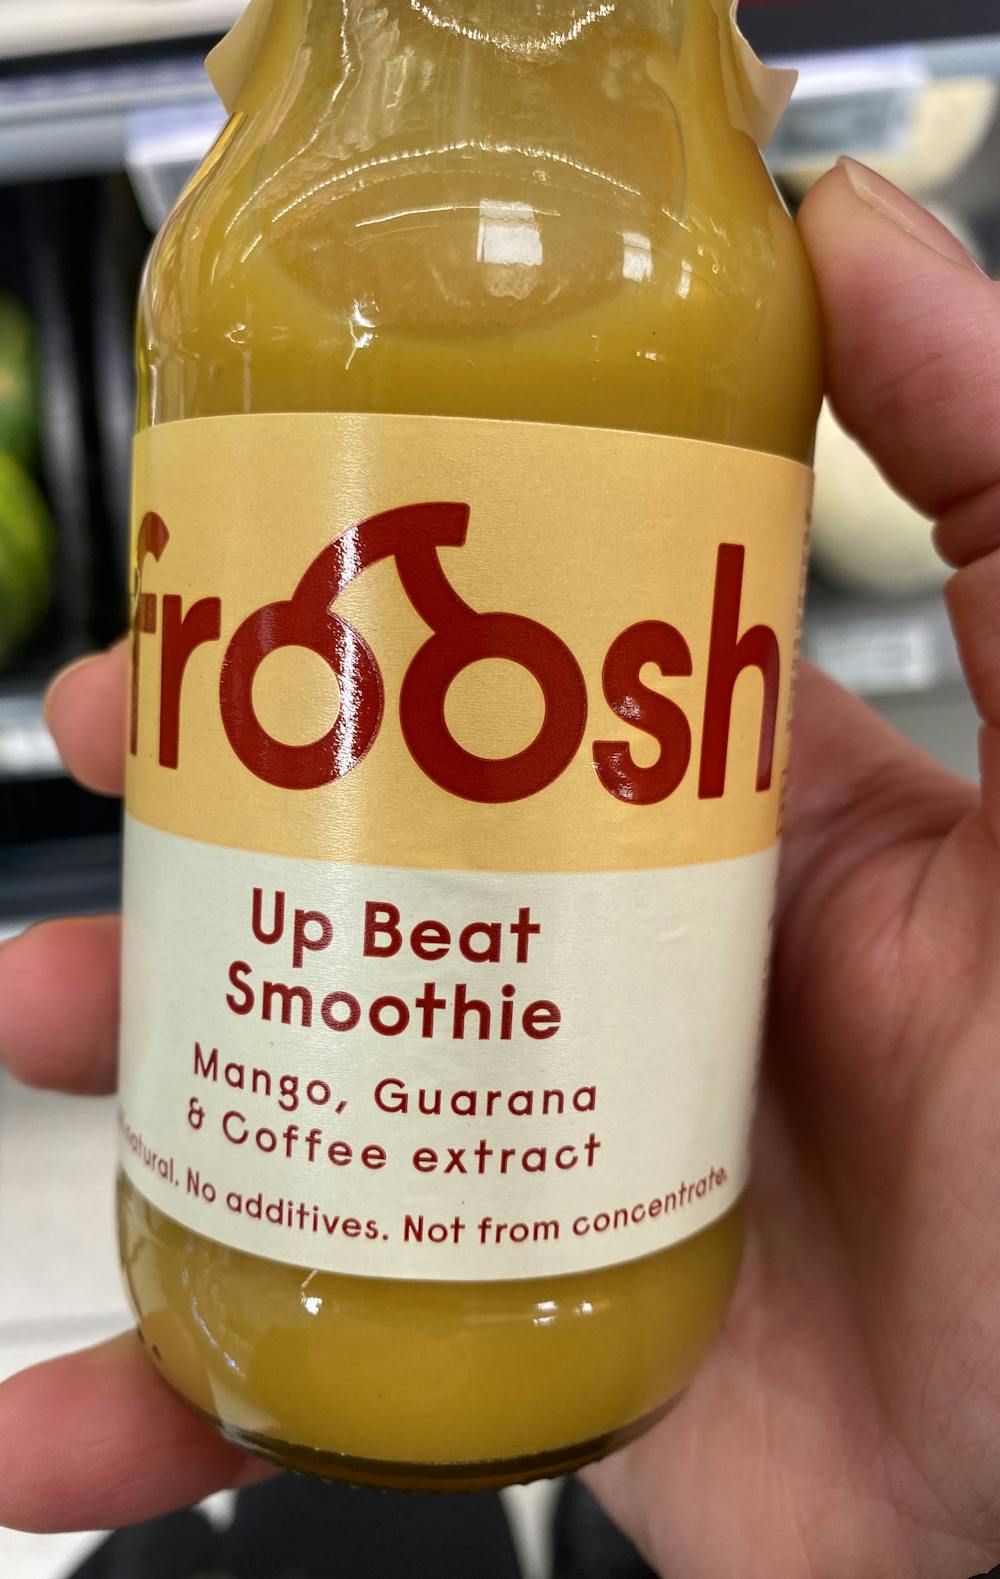 Up Beat Smoothie, Froosh